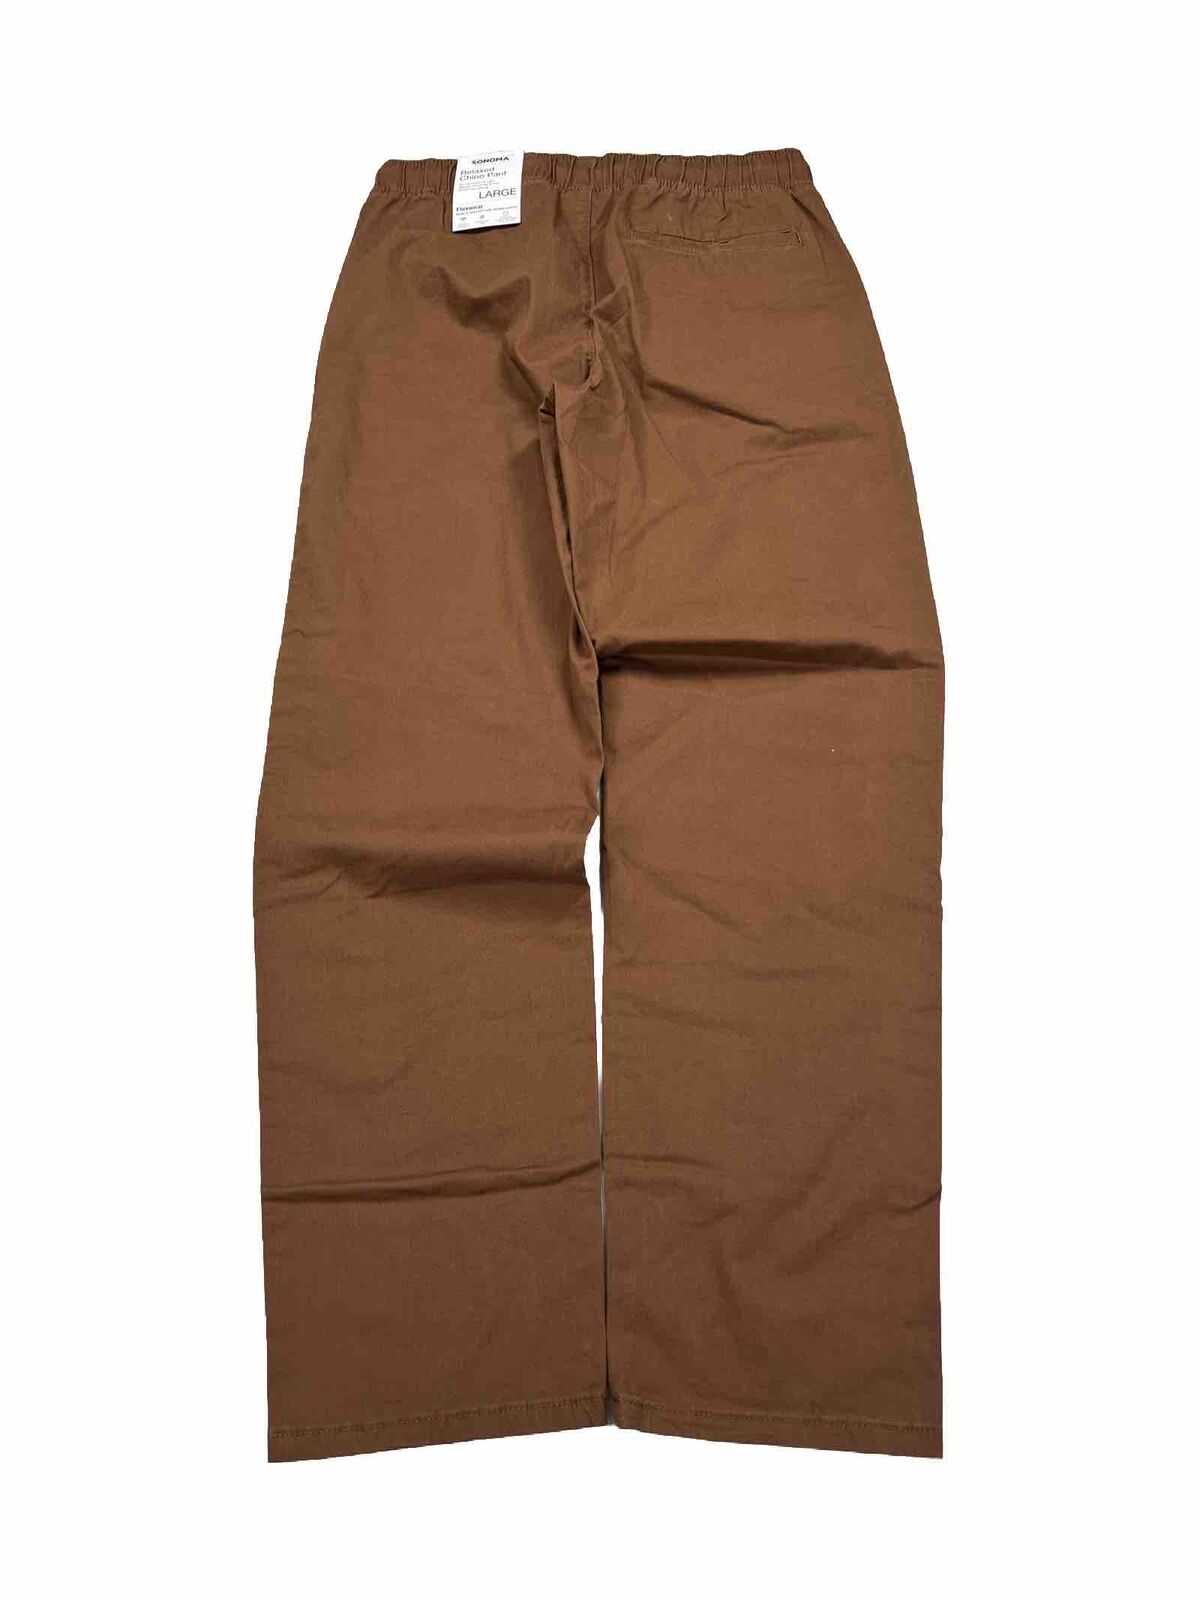 NEW Sonoma Men's Brown Relaxed Chino Pants with Drawstrings - L